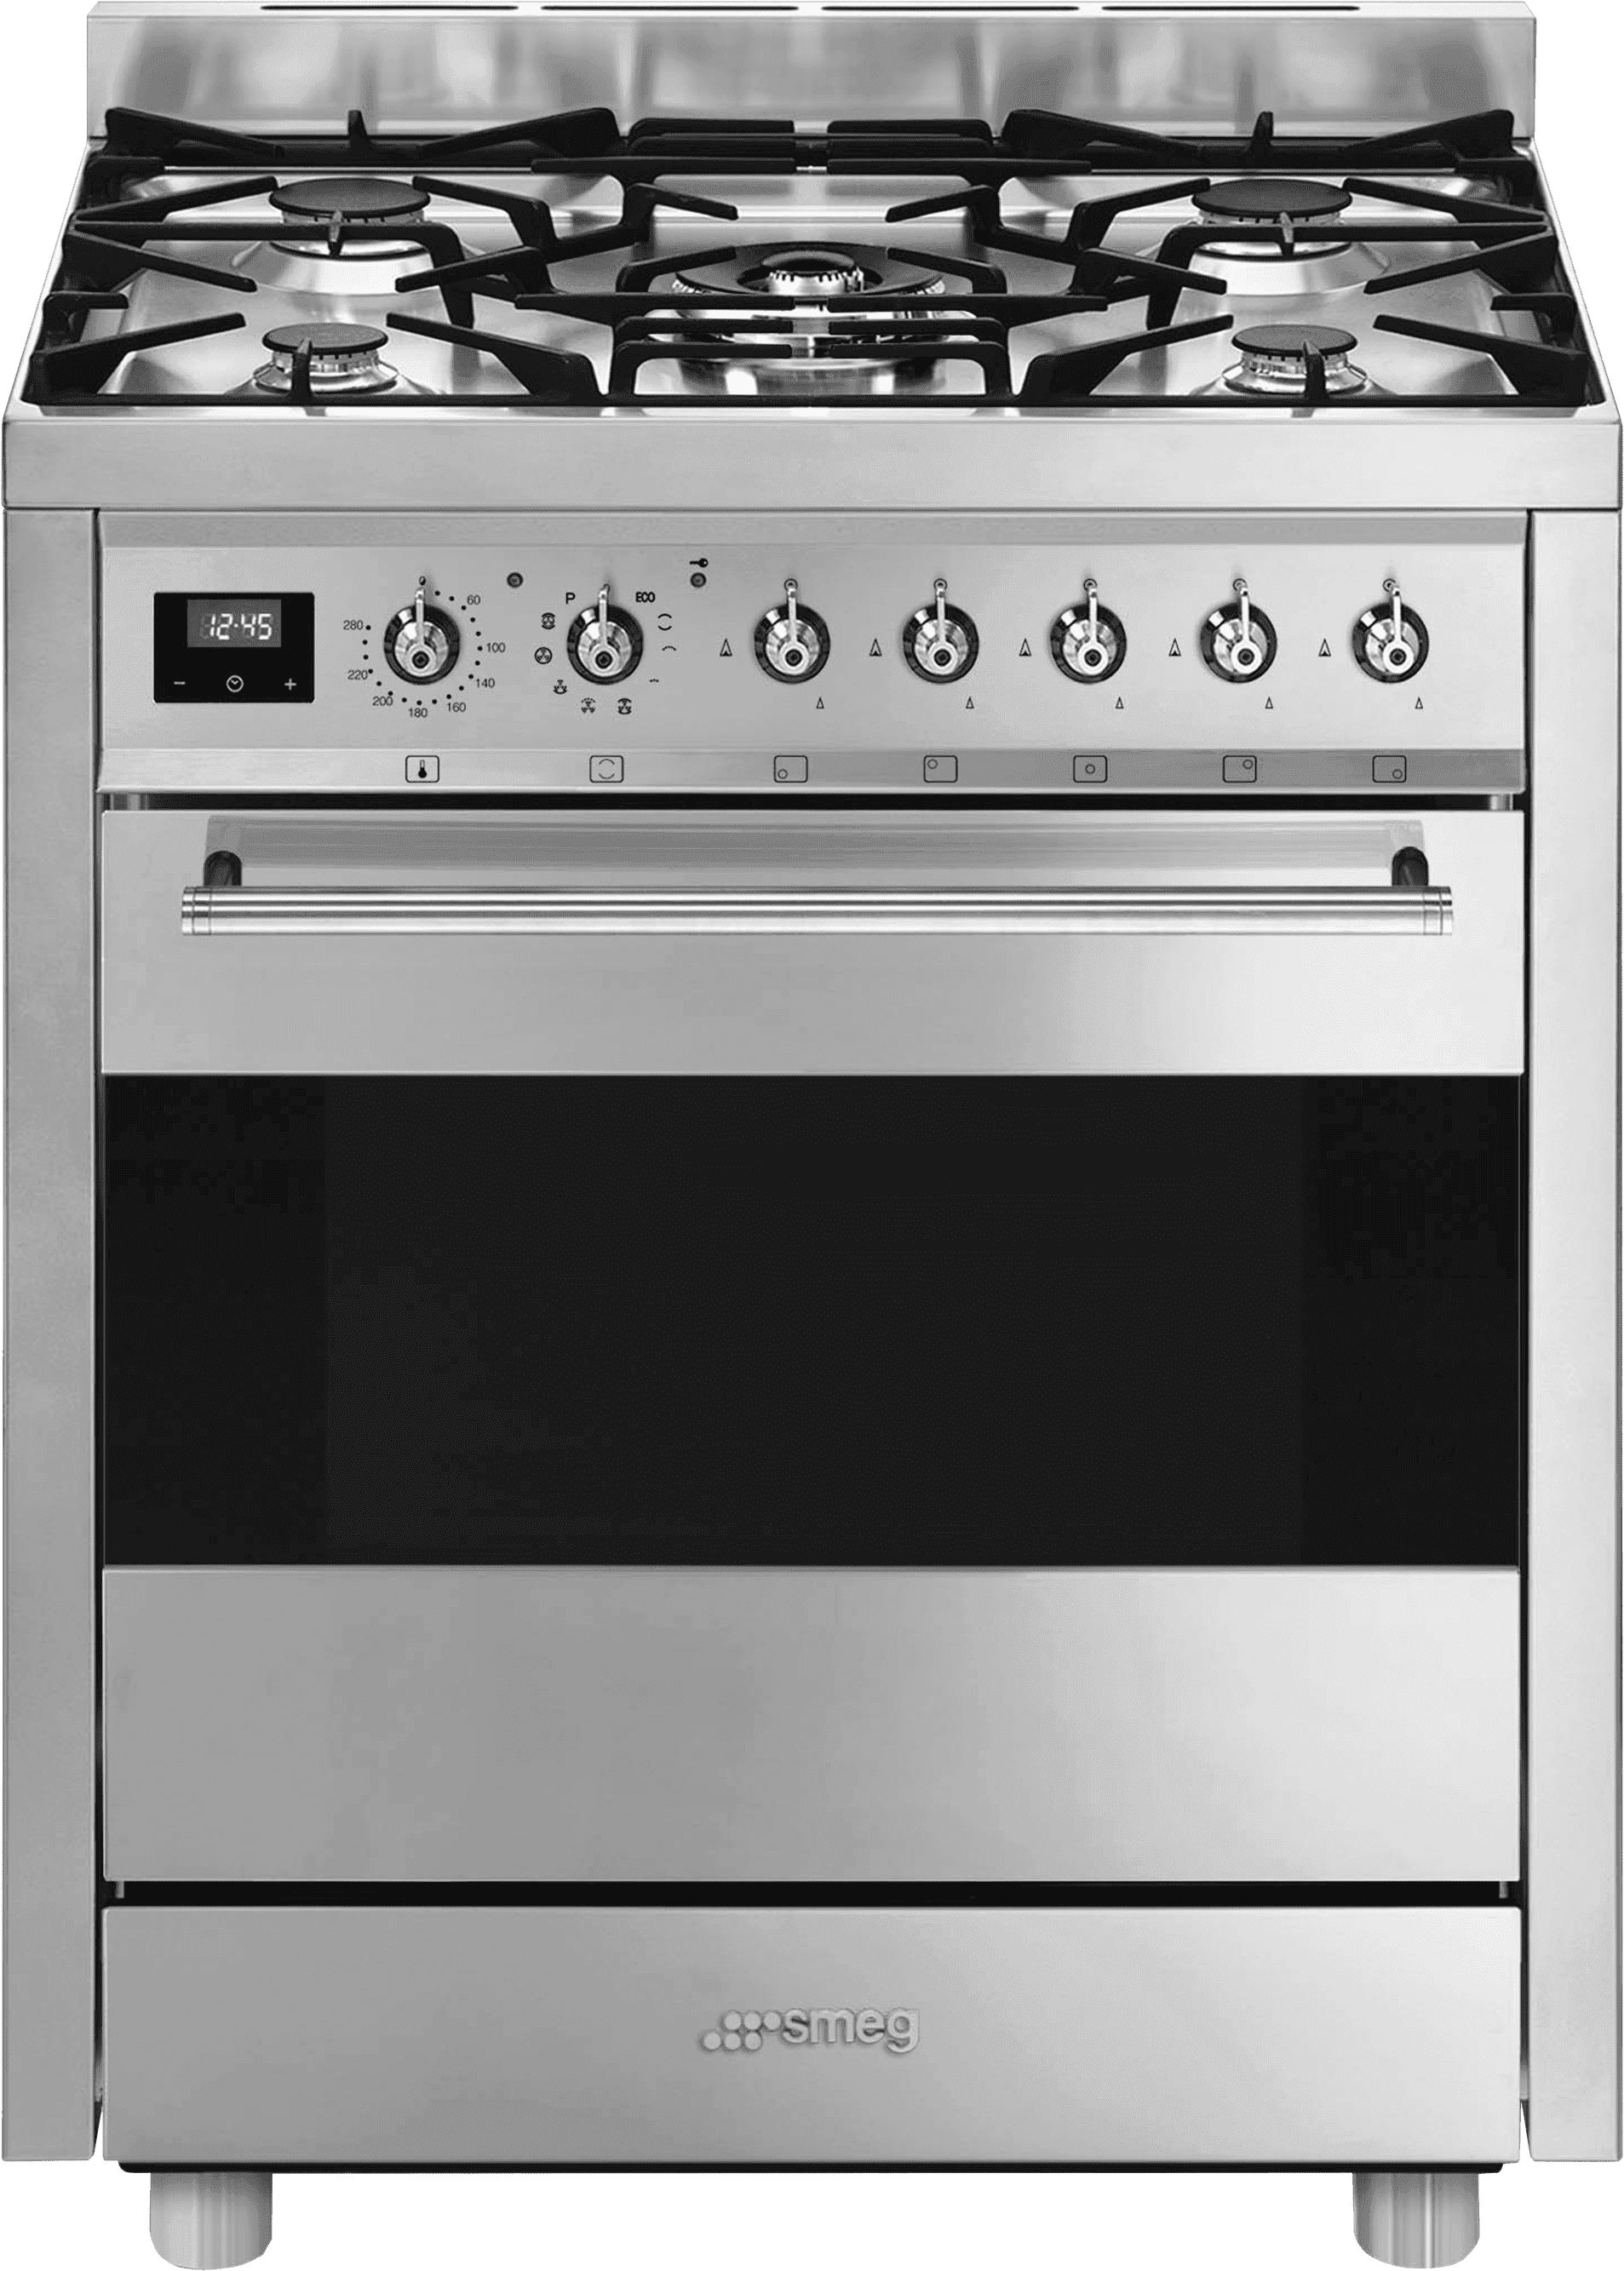 Smeg C7GPX9 Freestanding Dual Fuel Cooker - Stainless Steel - A Rated, Stainless Steel